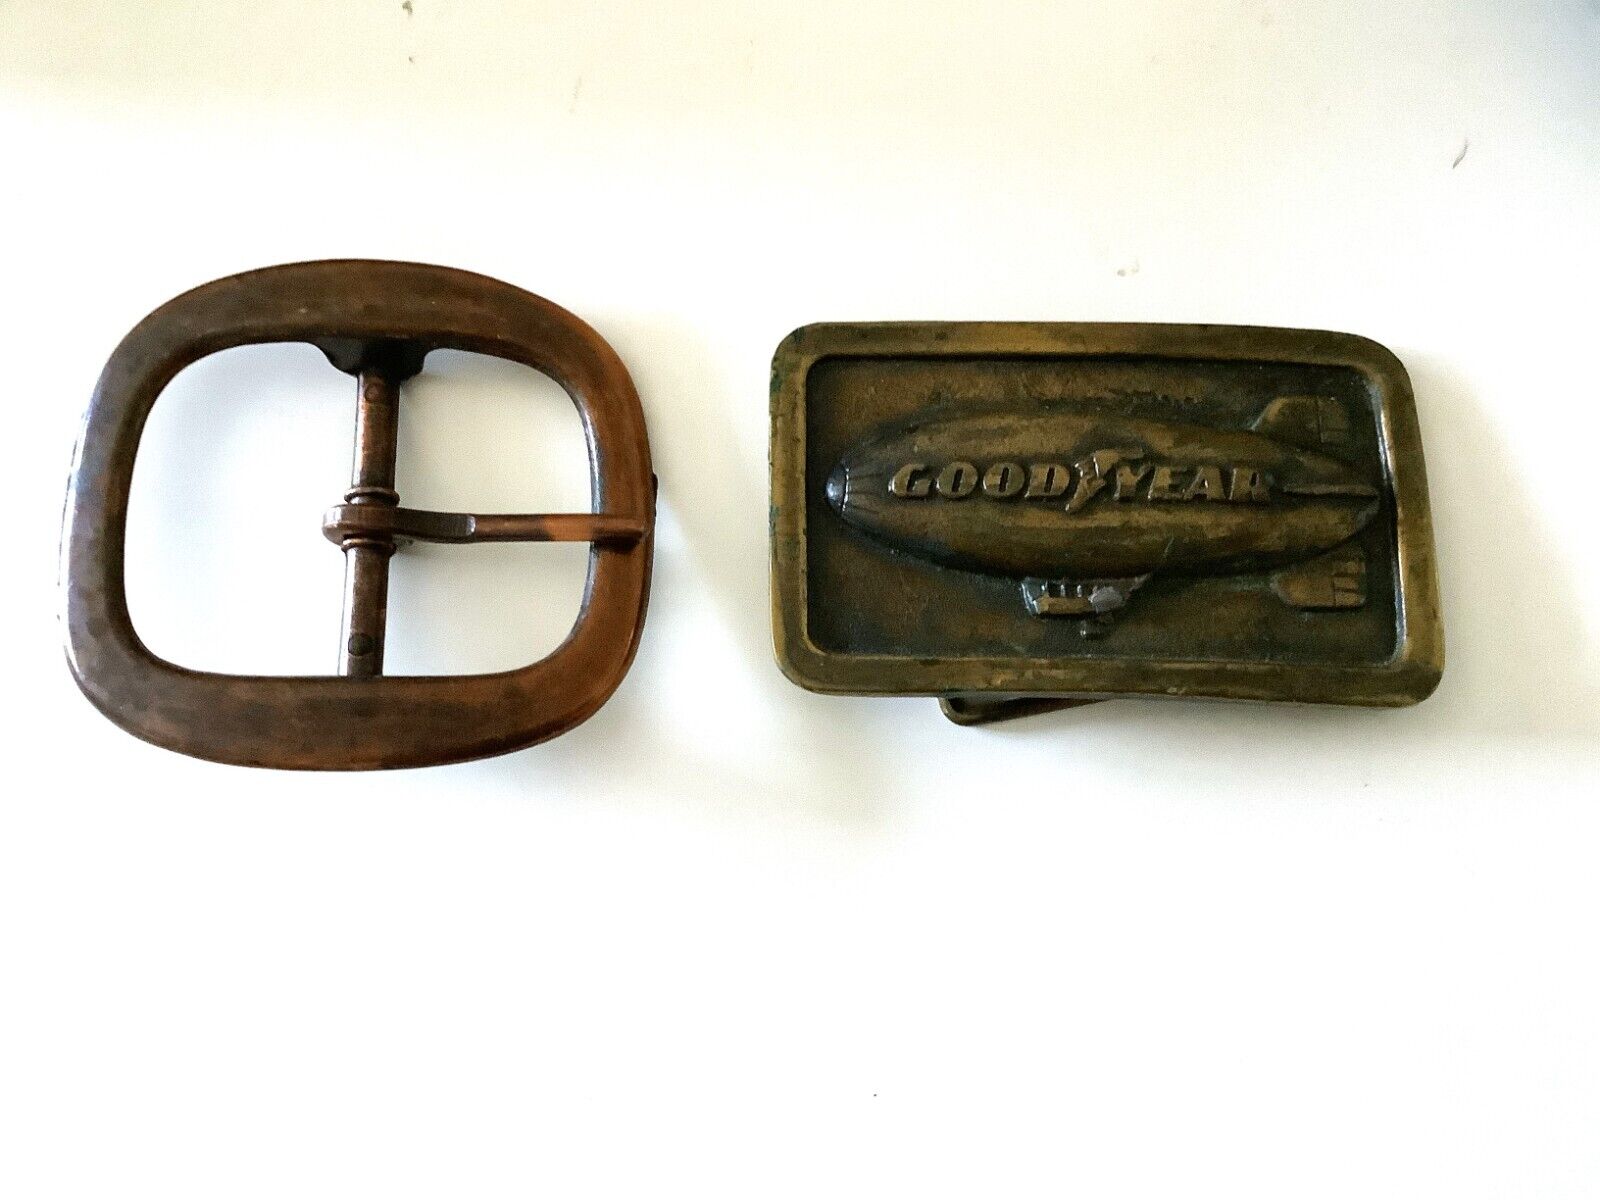 Lot of 2 VINTAGE BELT BUCKLE- 1970’s THE GOODYEAR (BLIMP) TIRE & RUBBER CO.